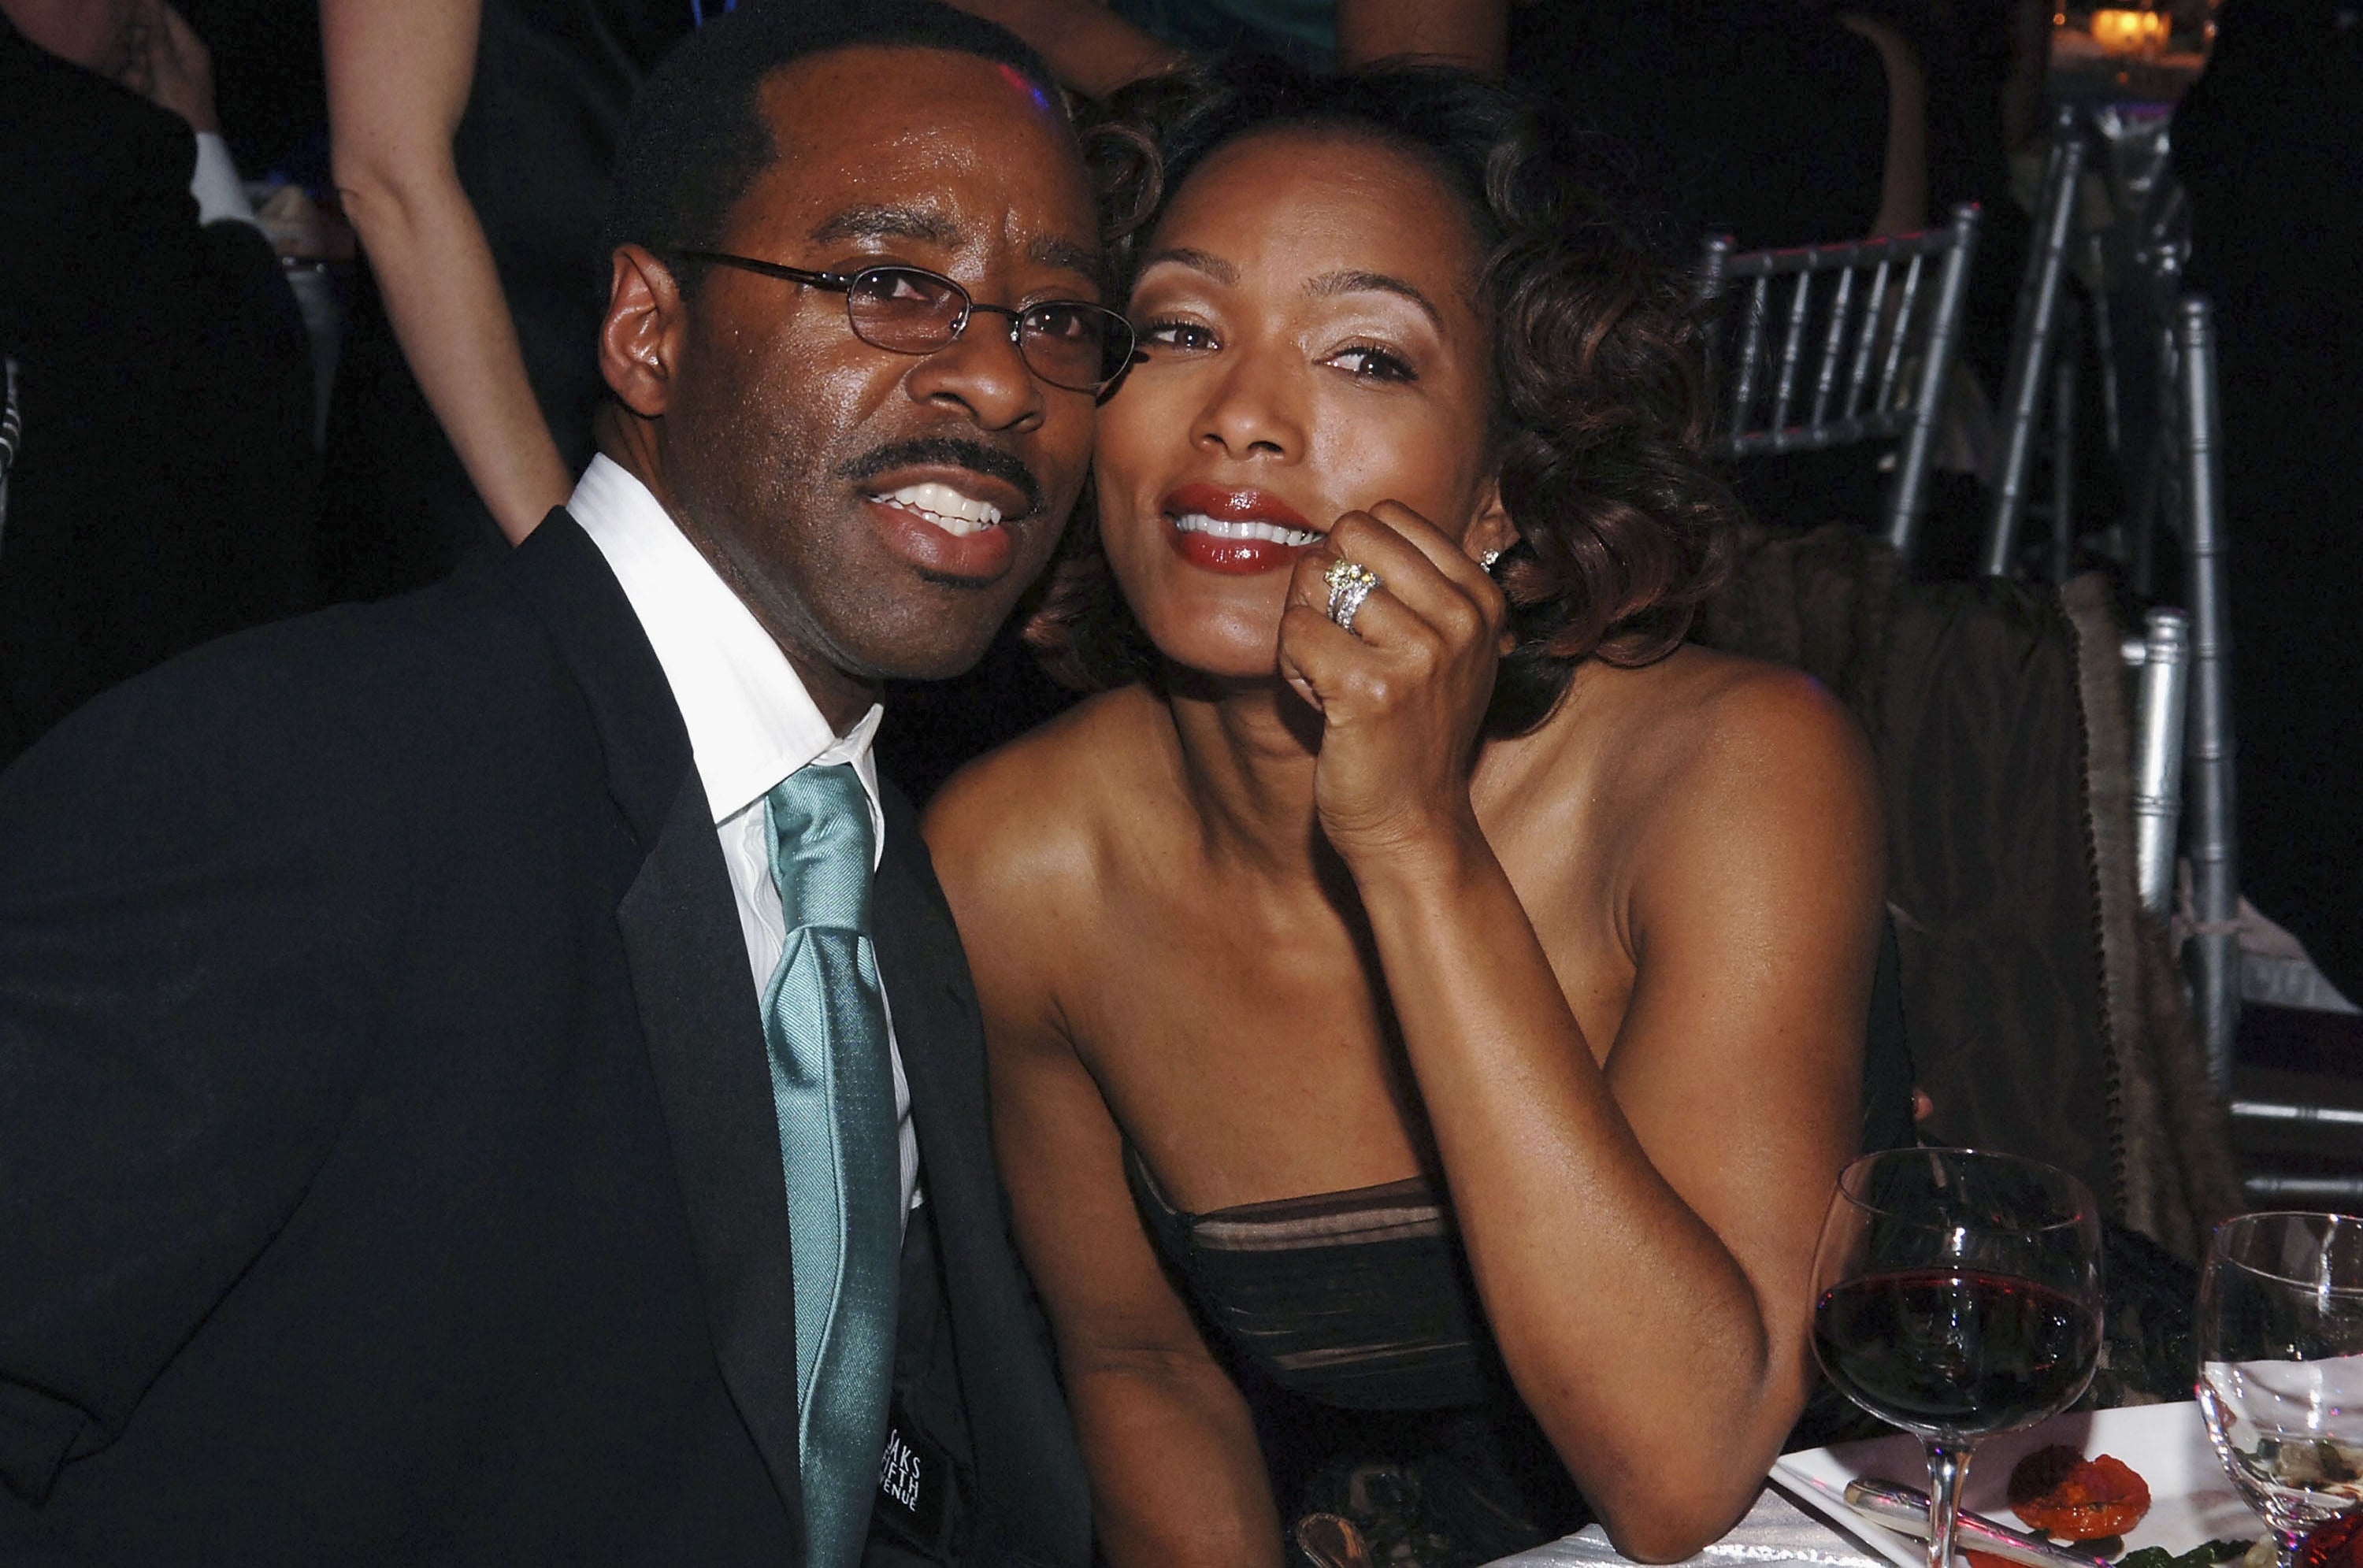 11 Sweet Photos Of Angela Bassett And Courtney B. Vance Packing On The PDA